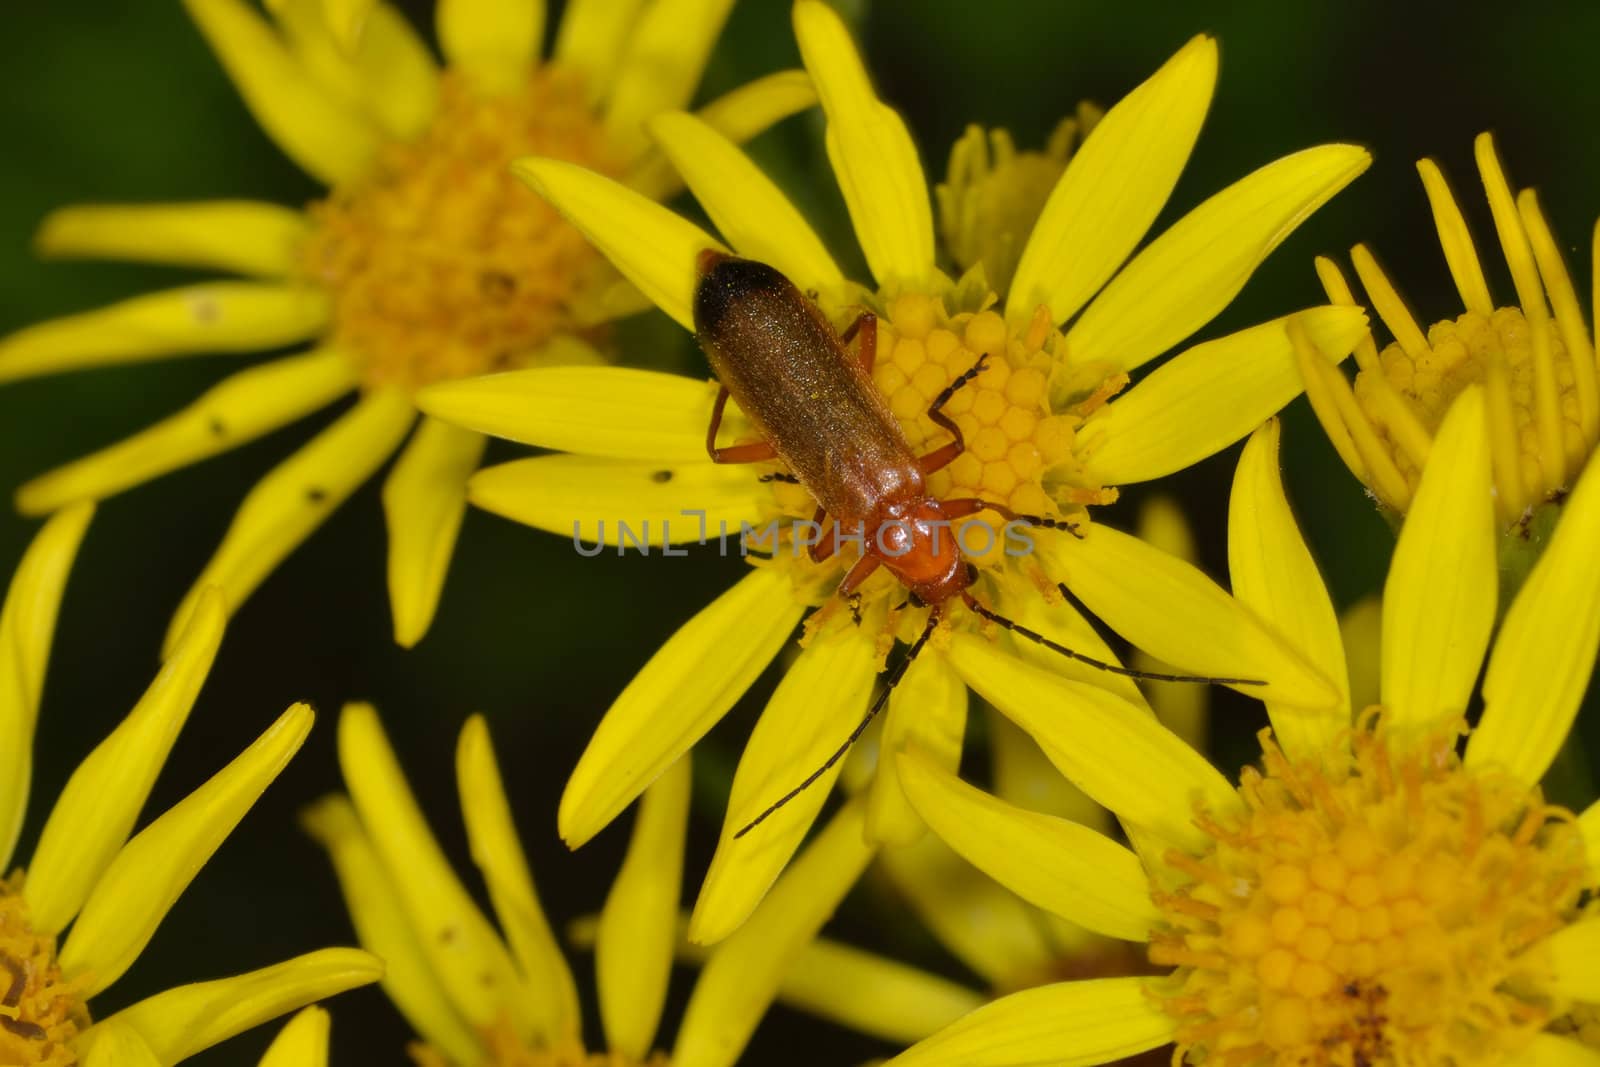 Red soldier beetle on Ragwort by pauws99